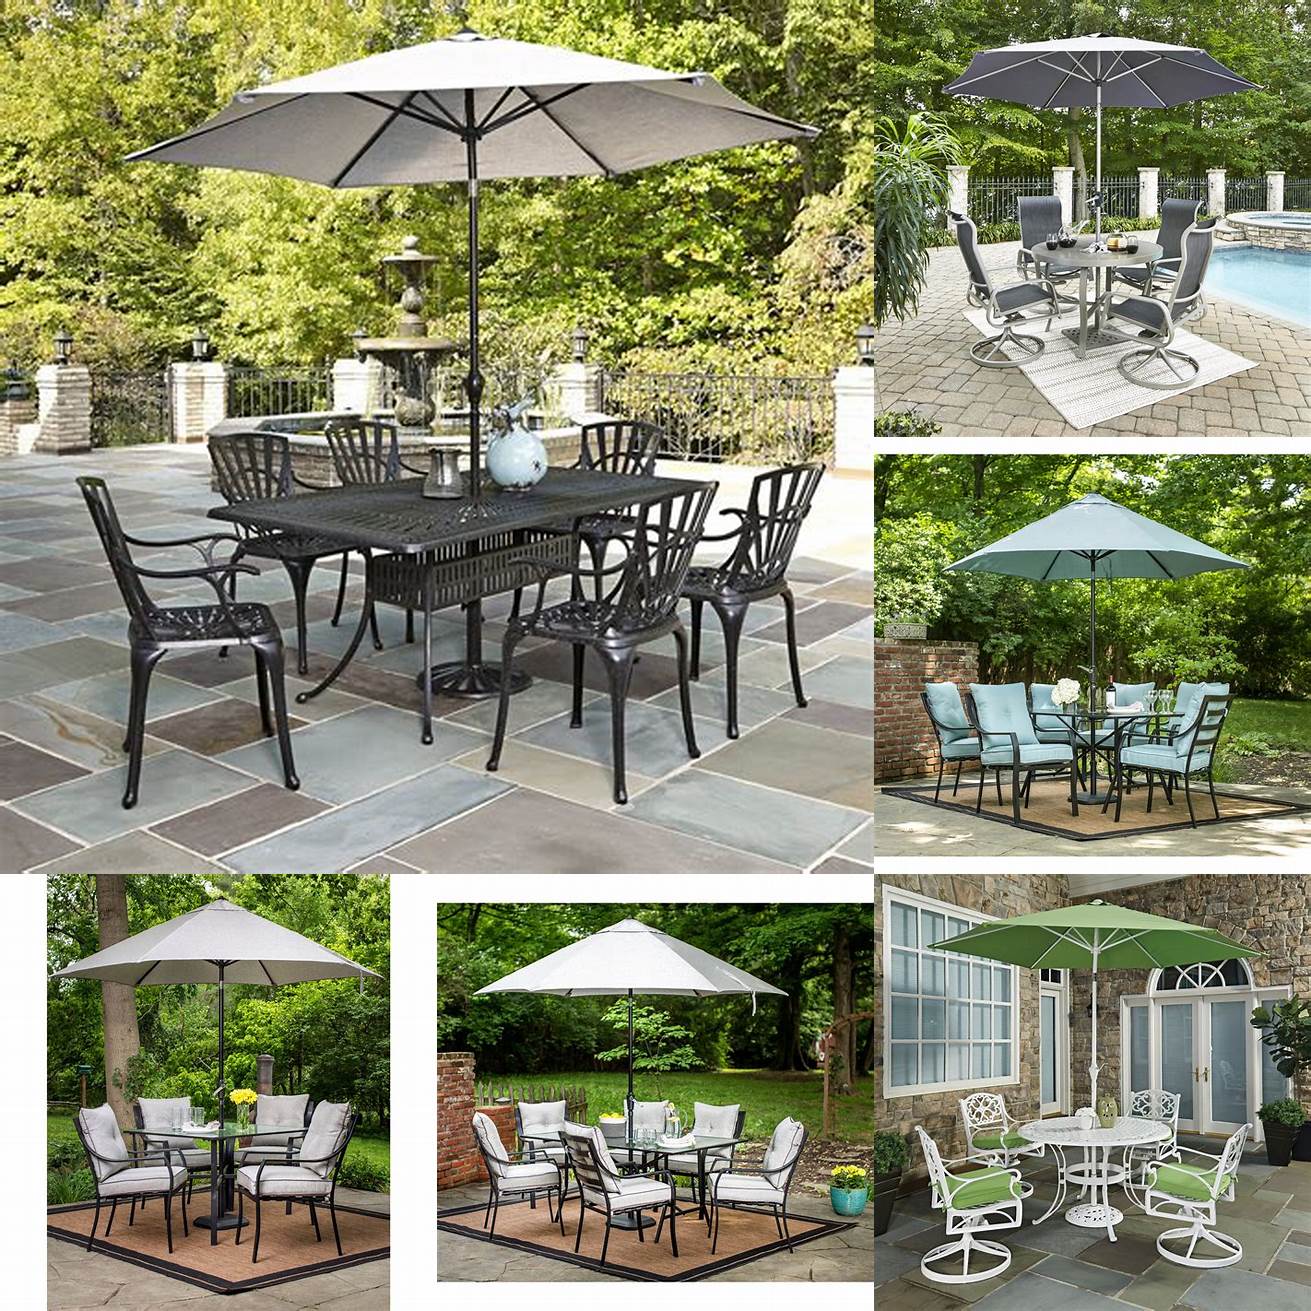 Outdoor dining set with umbrella